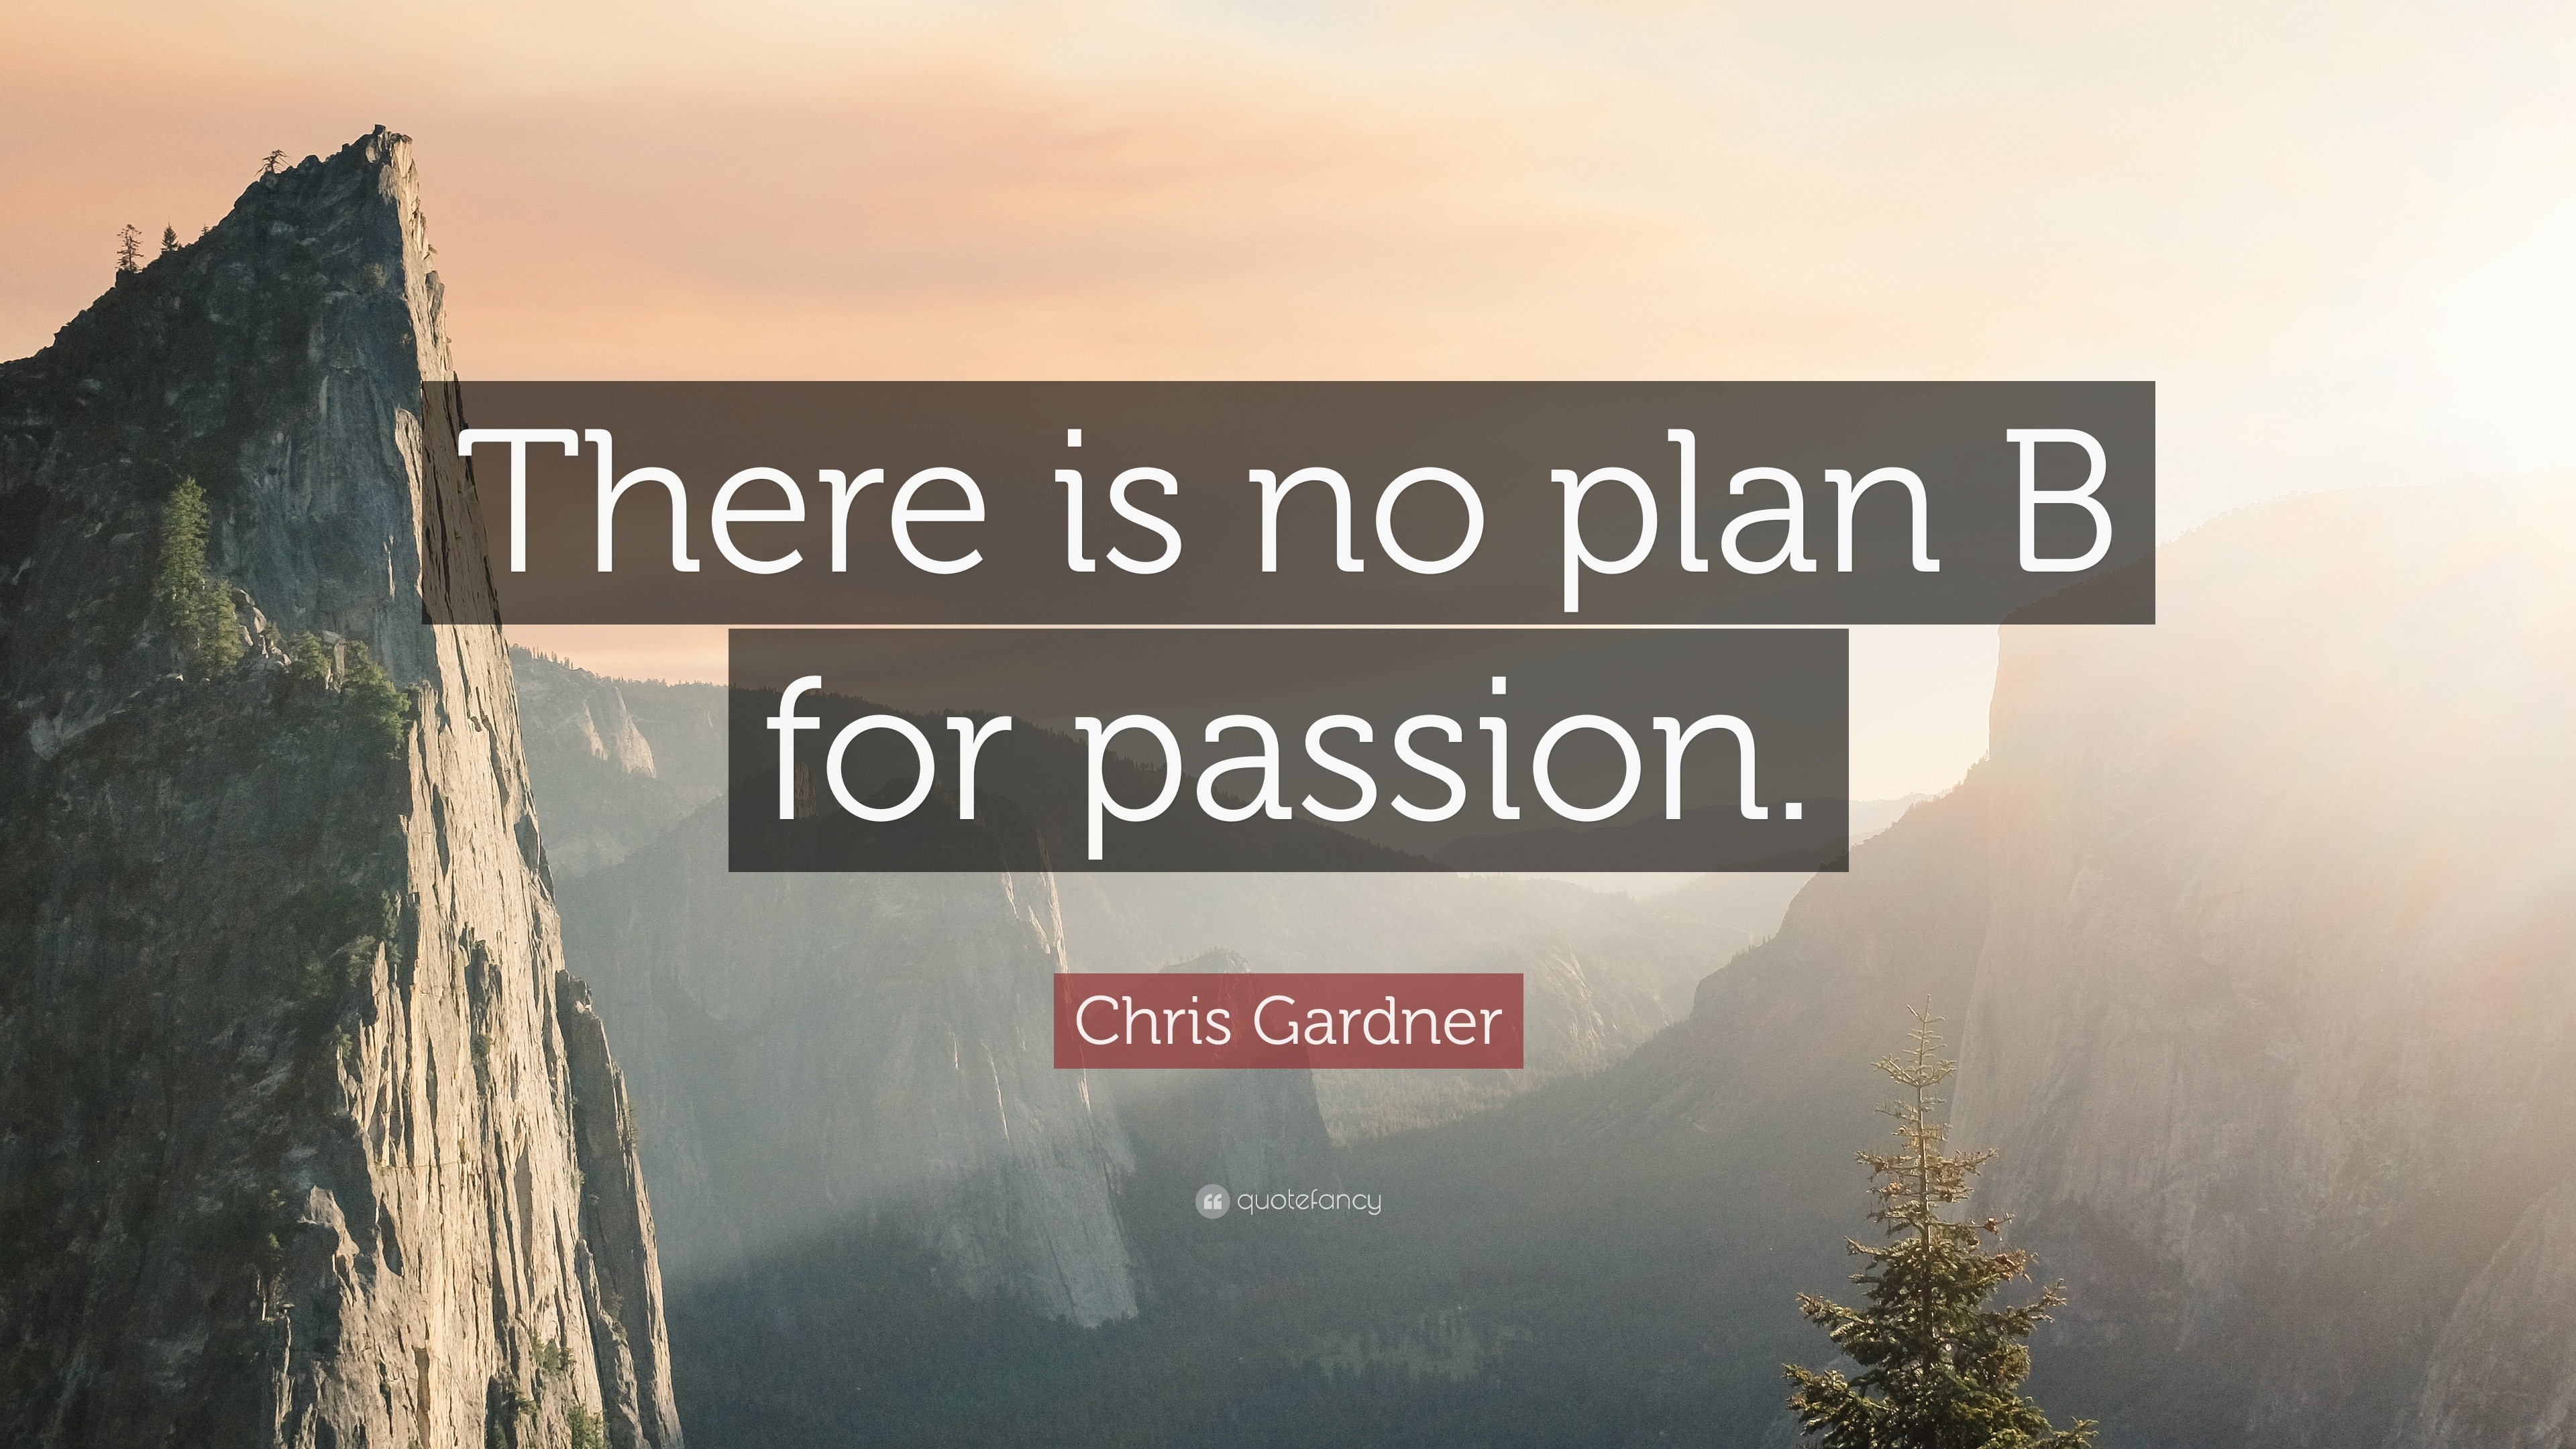 3840x2160 Chris Gardner Quote: “There is no plan B for passion.”